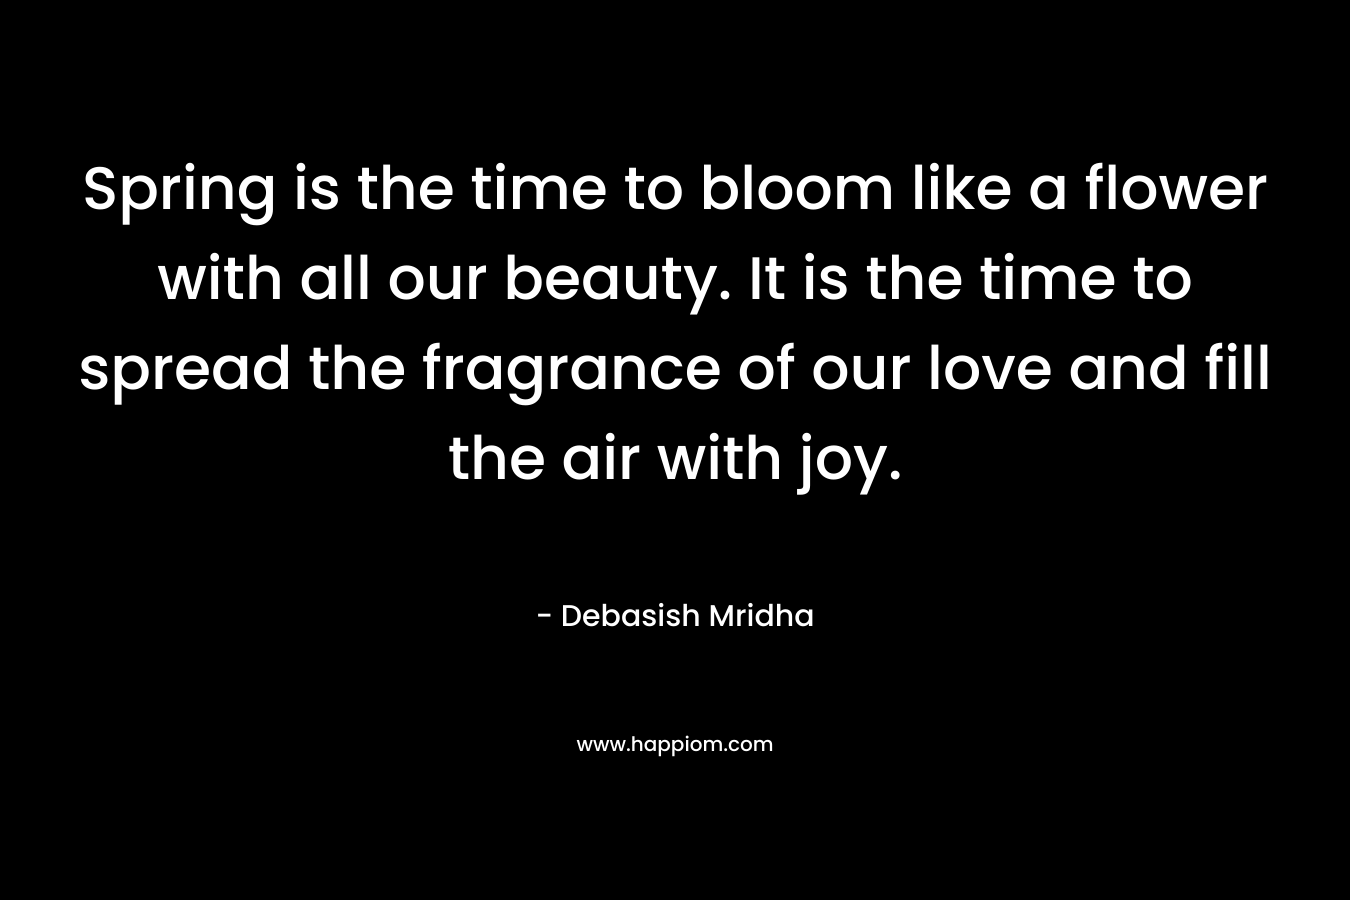 Spring is the time to bloom like a flower with all our beauty. It is the time to spread the fragrance of our love and fill the air with joy. – Debasish Mridha